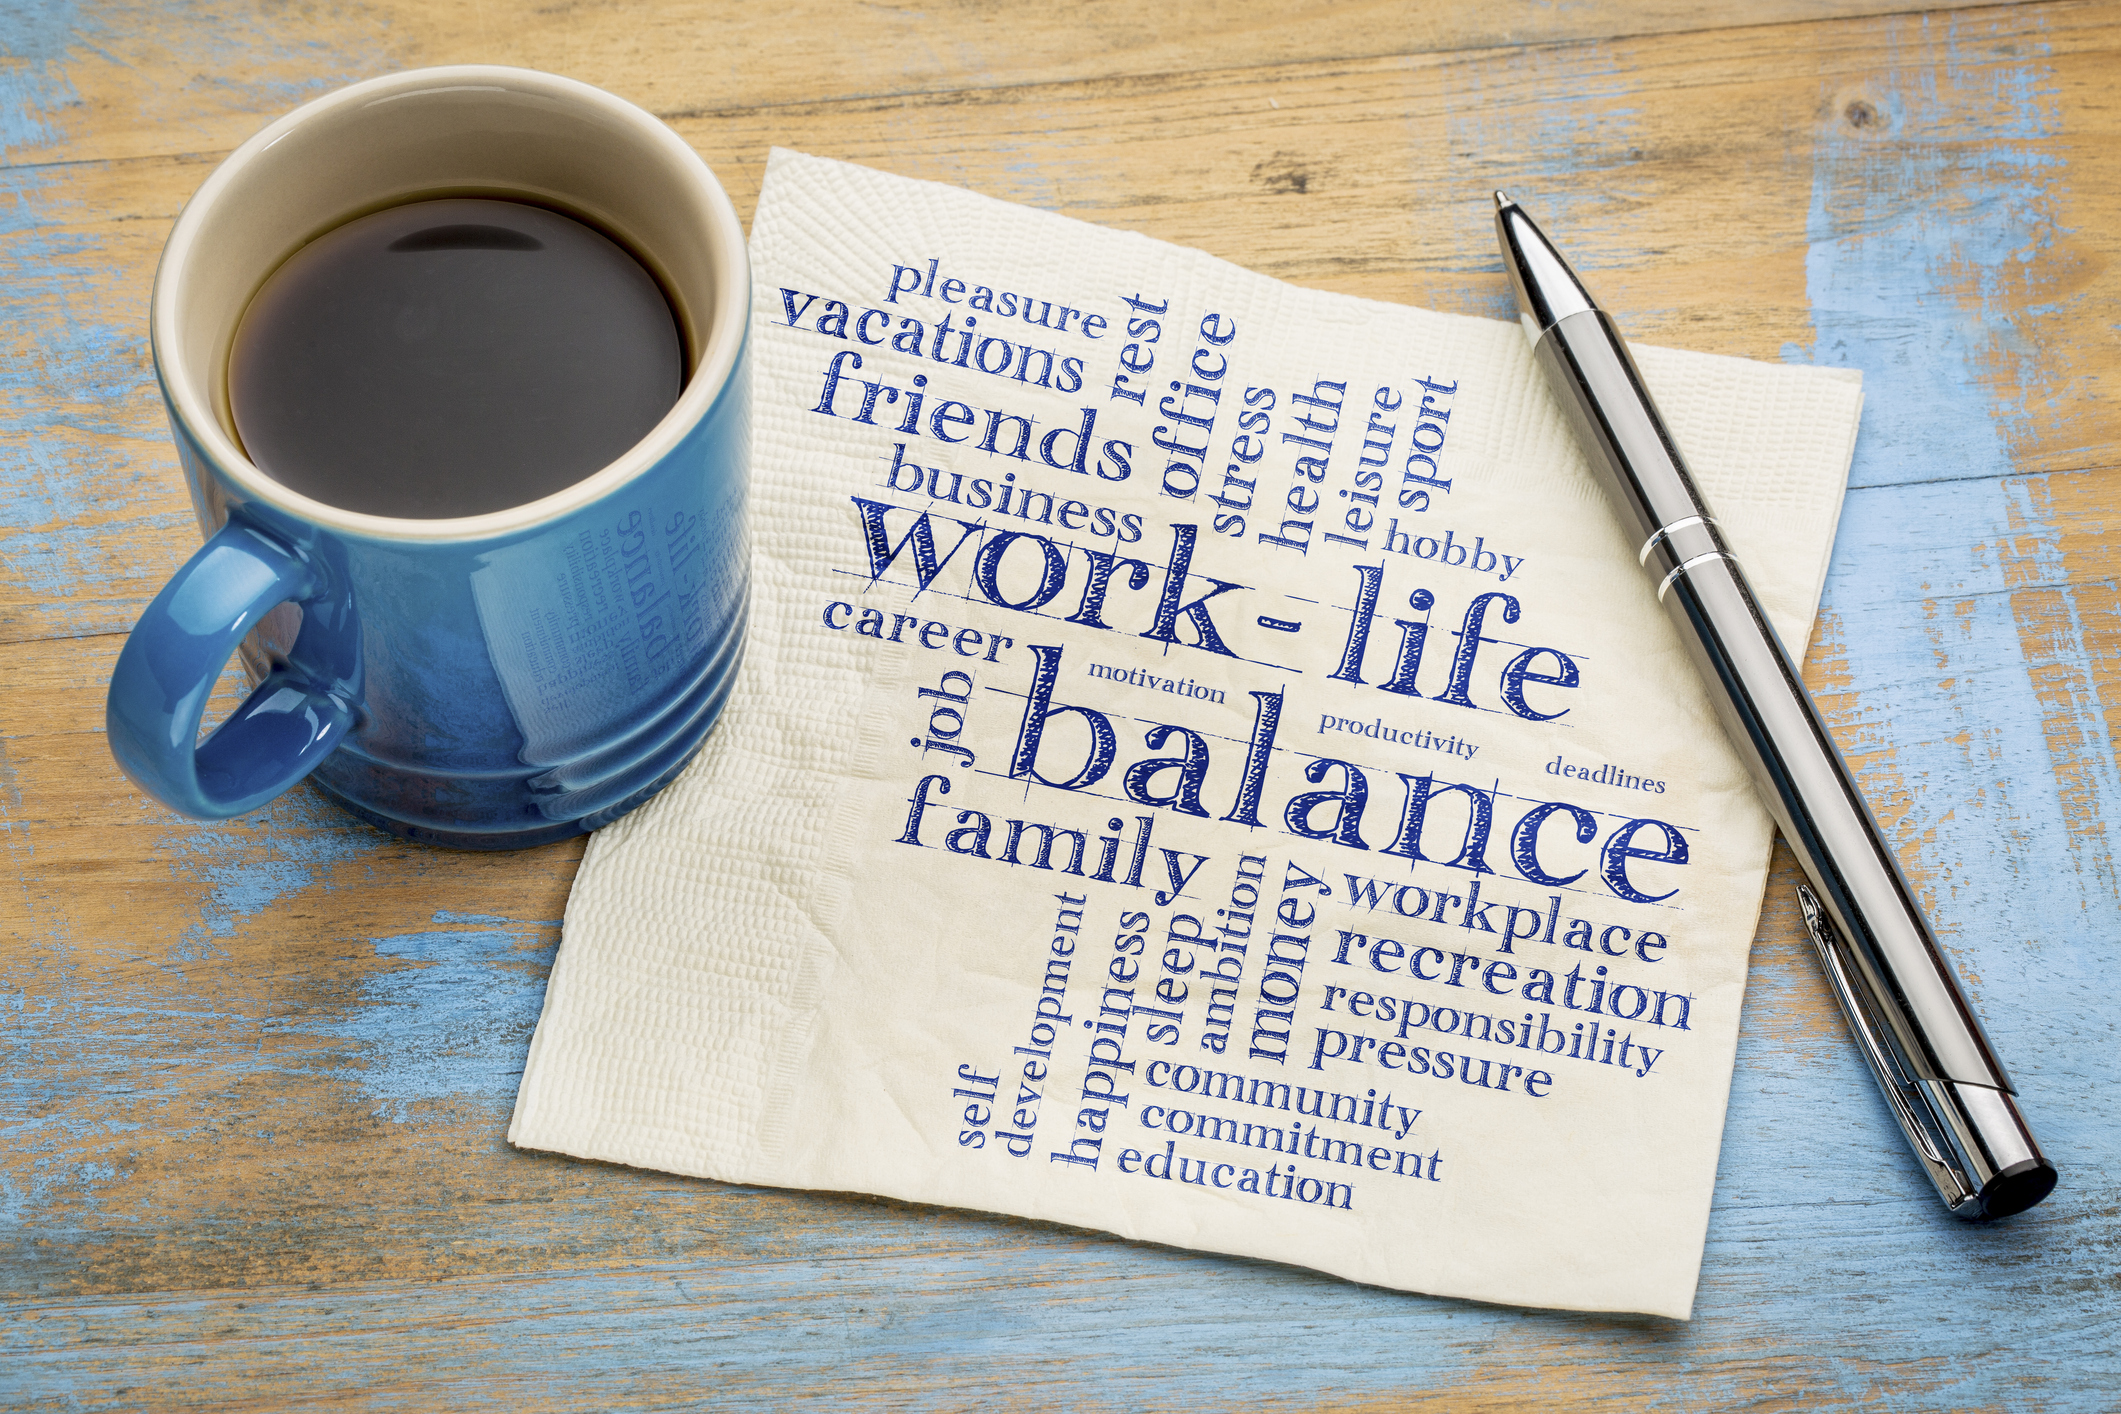 High stress and poor work-life balance top the concerns of critical care doctors responding to a recent survey.